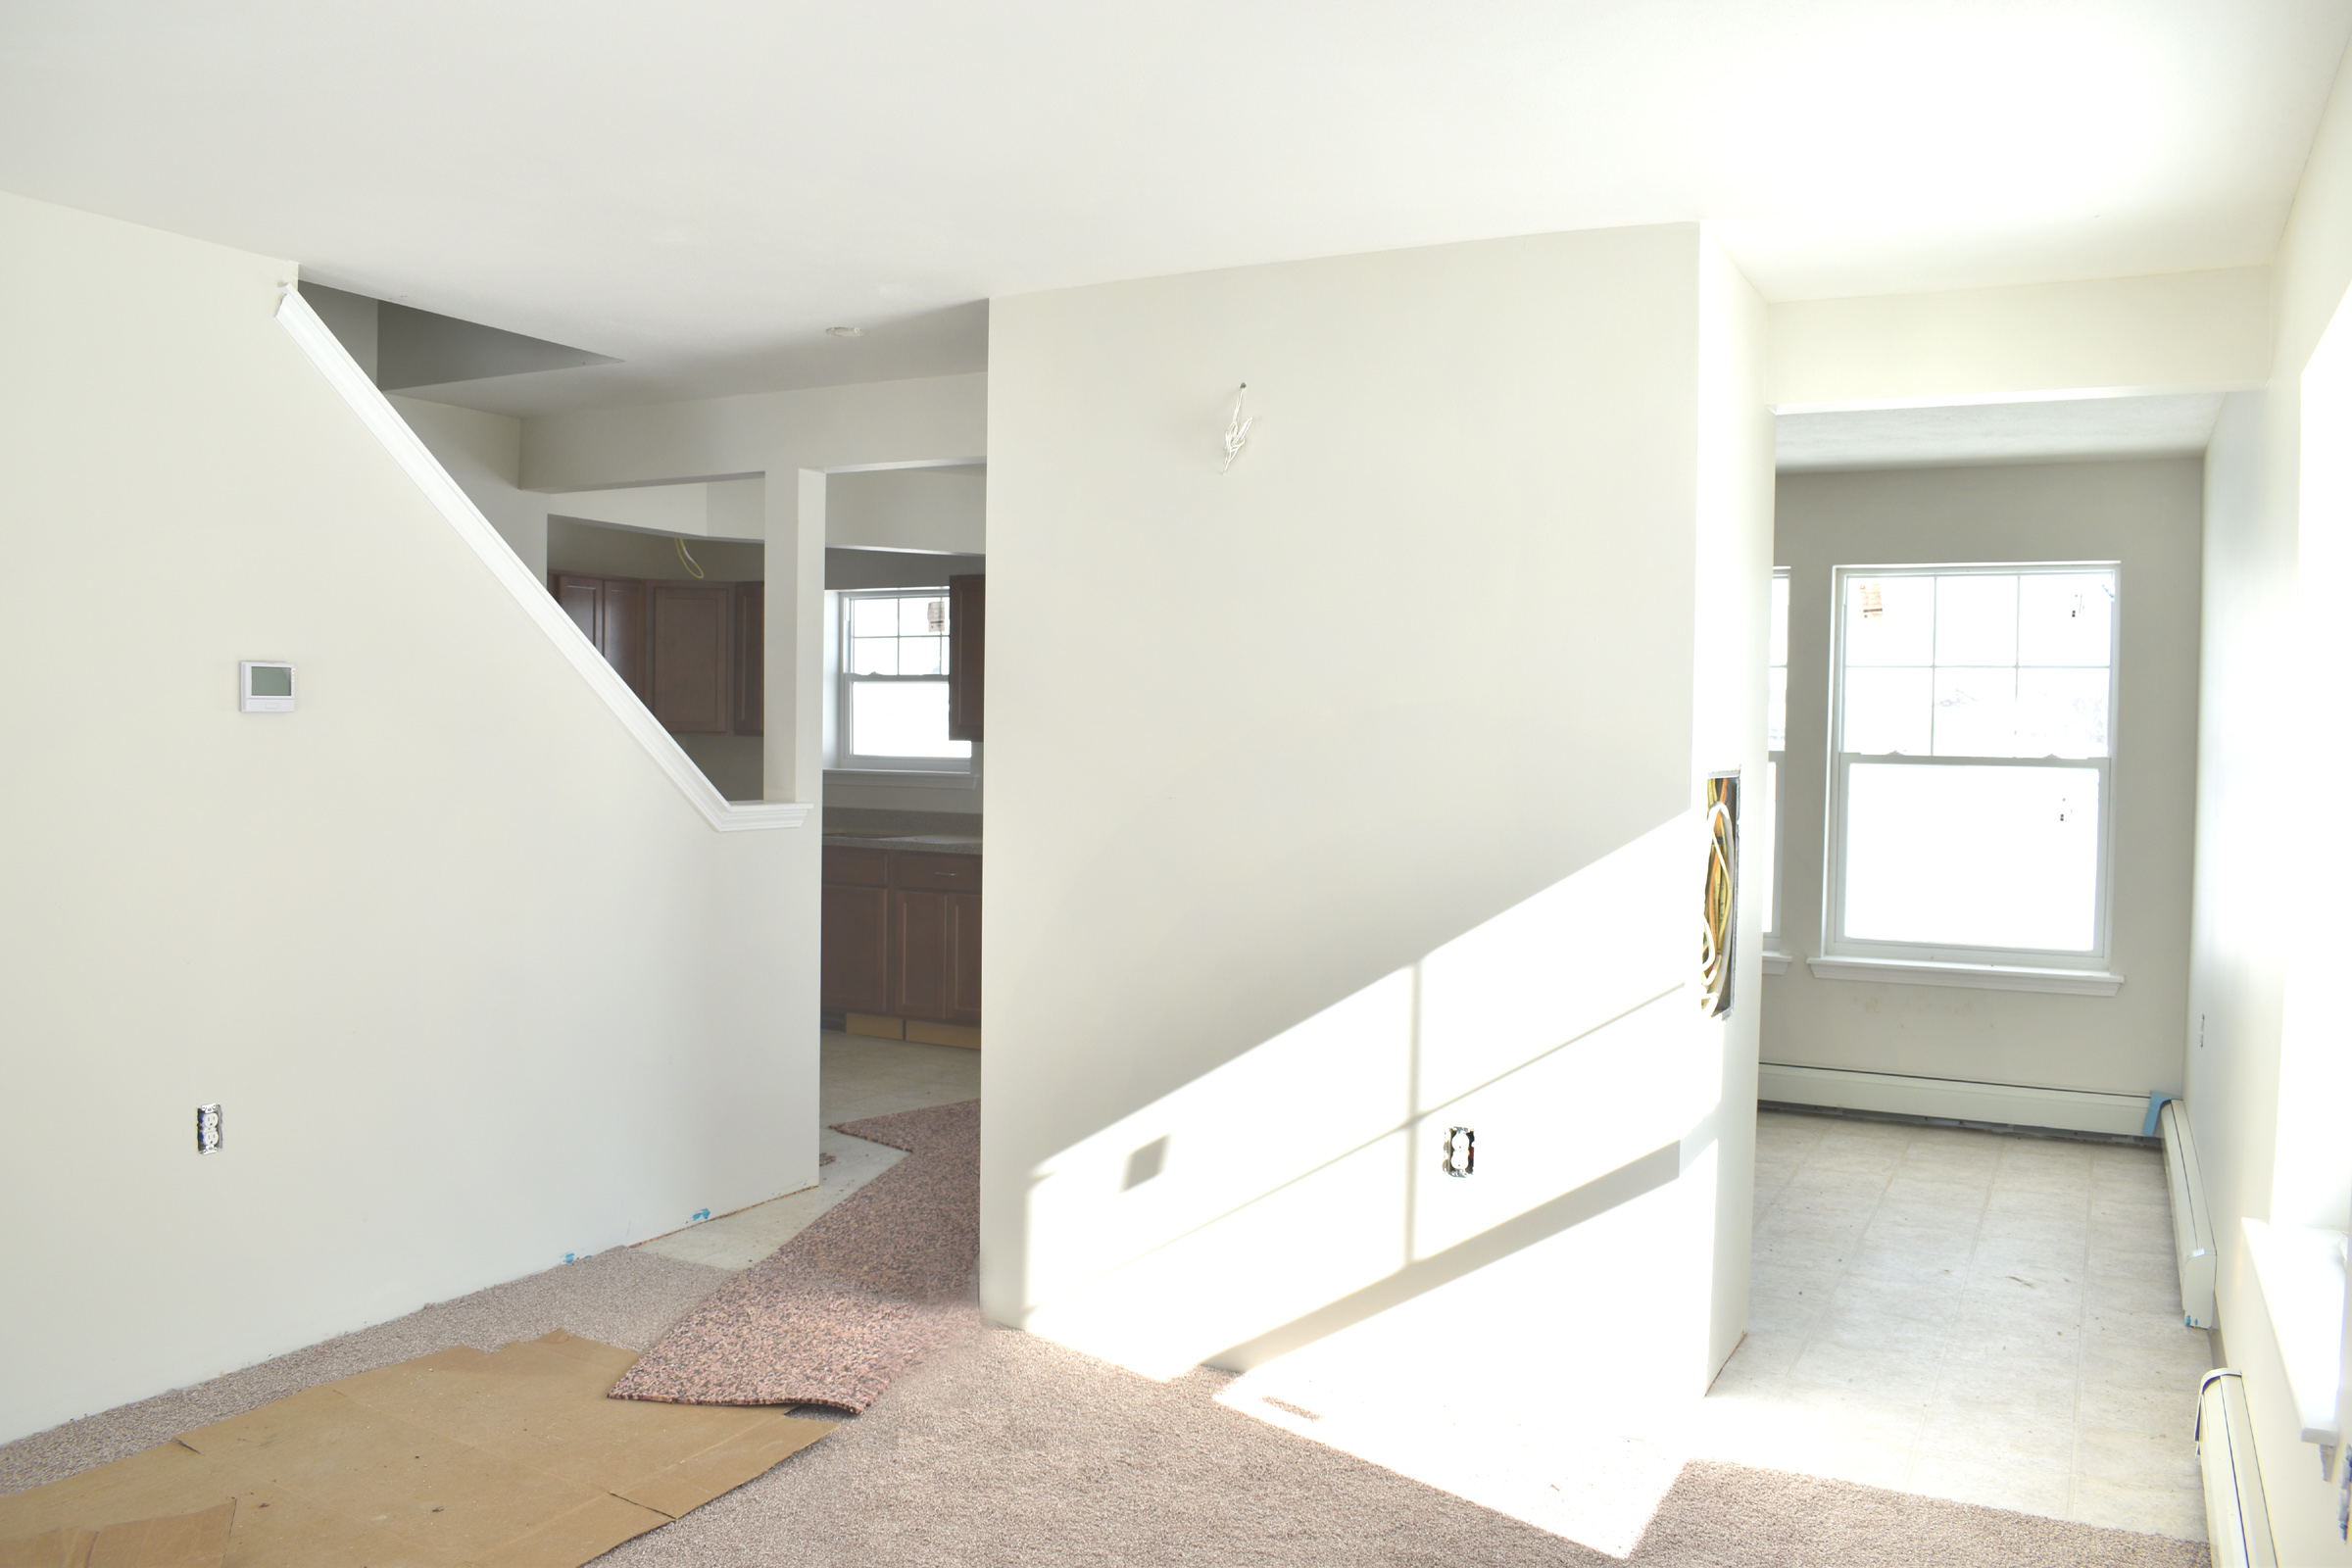 property management company client list syracuse ny living room and entry during construction image of selkirk townhome